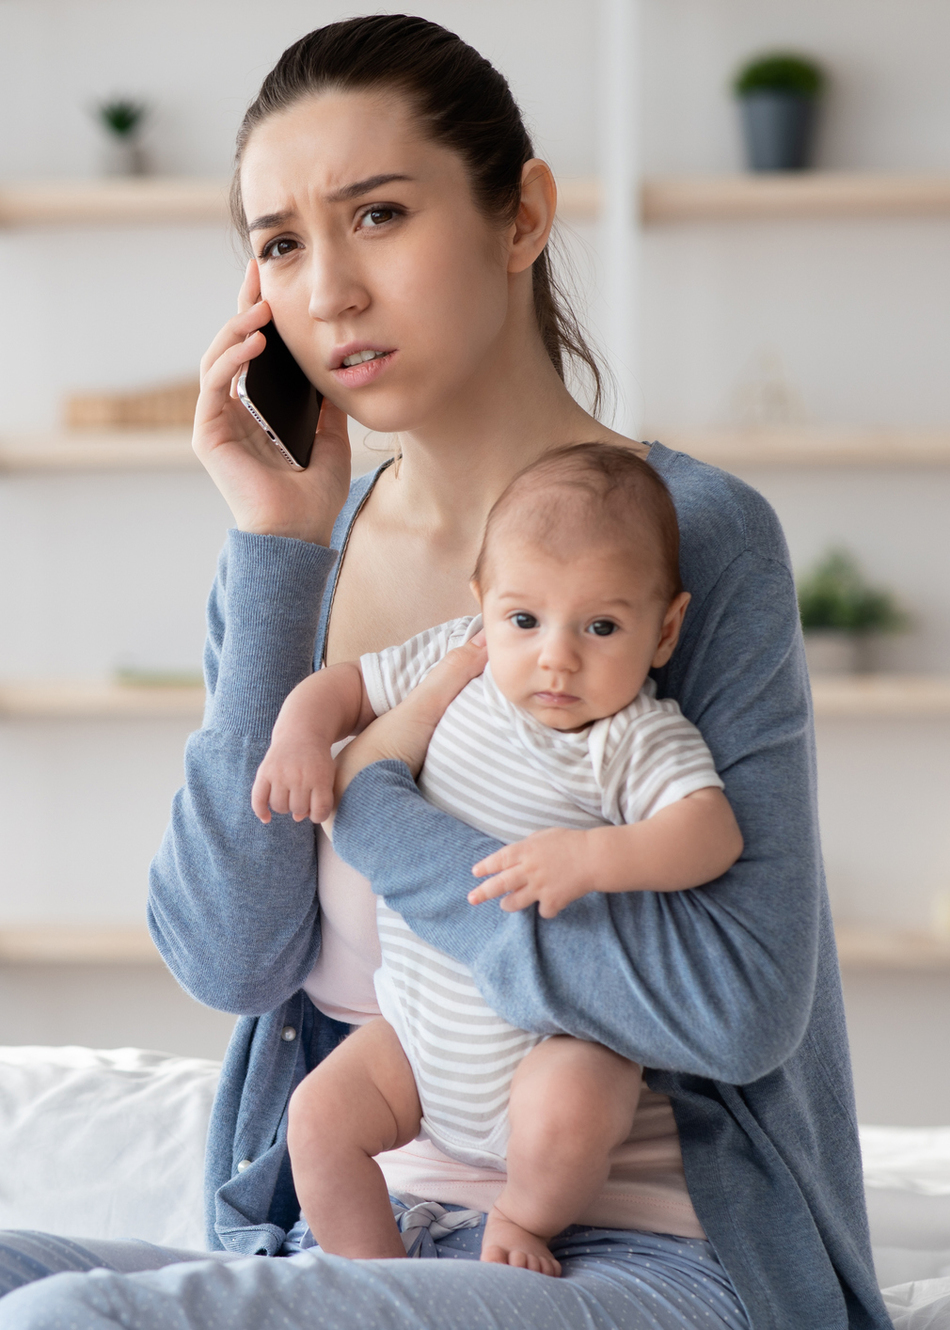 When Should I Call the On-Call Pediatrician?